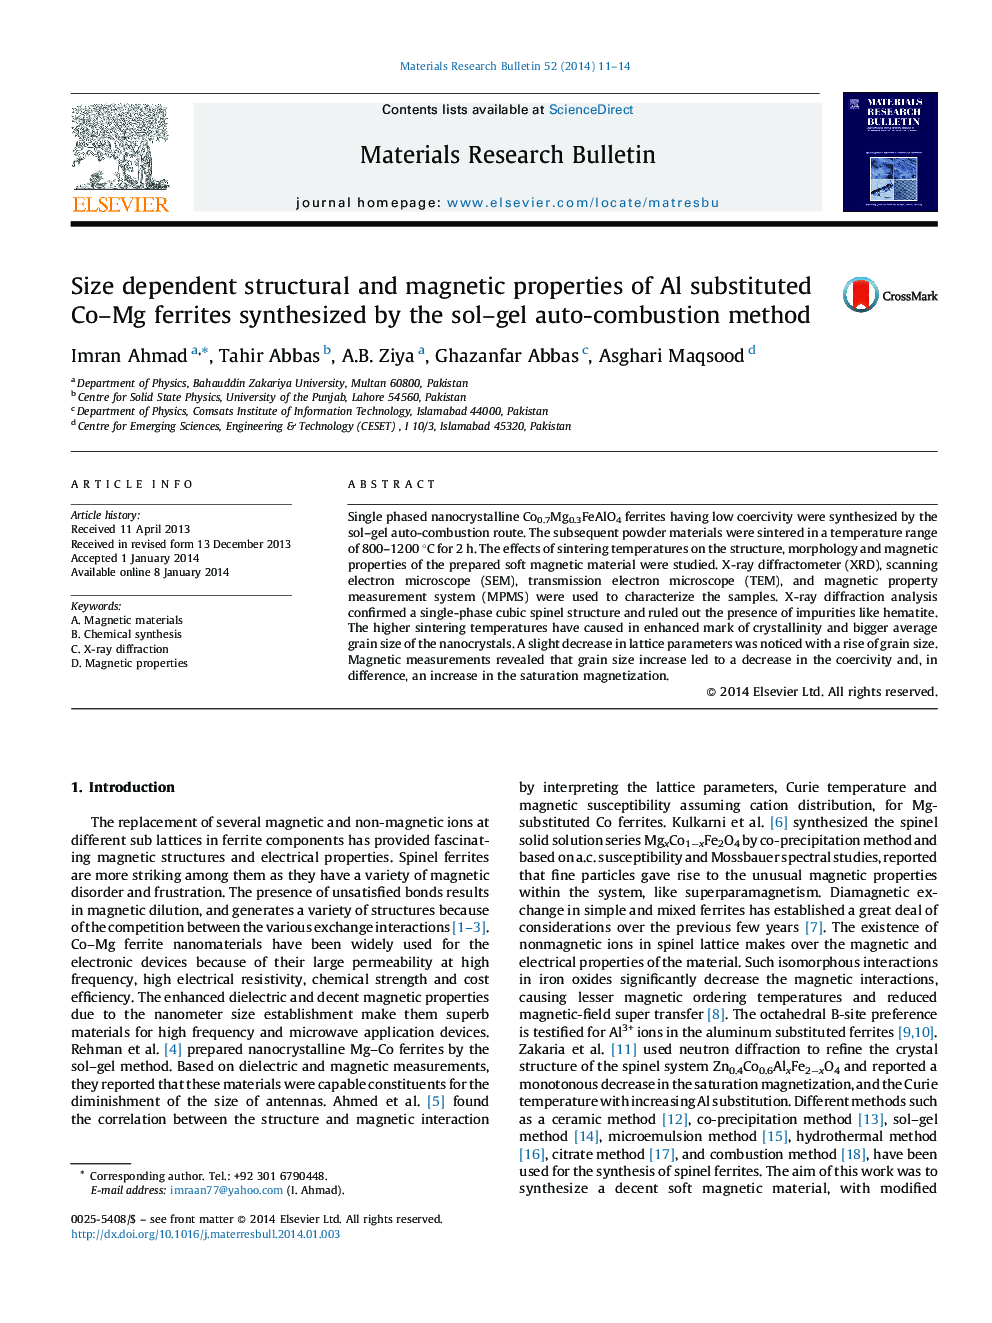 Size dependent structural and magnetic properties of Al substituted Co–Mg ferrites synthesized by the sol–gel auto-combustion method